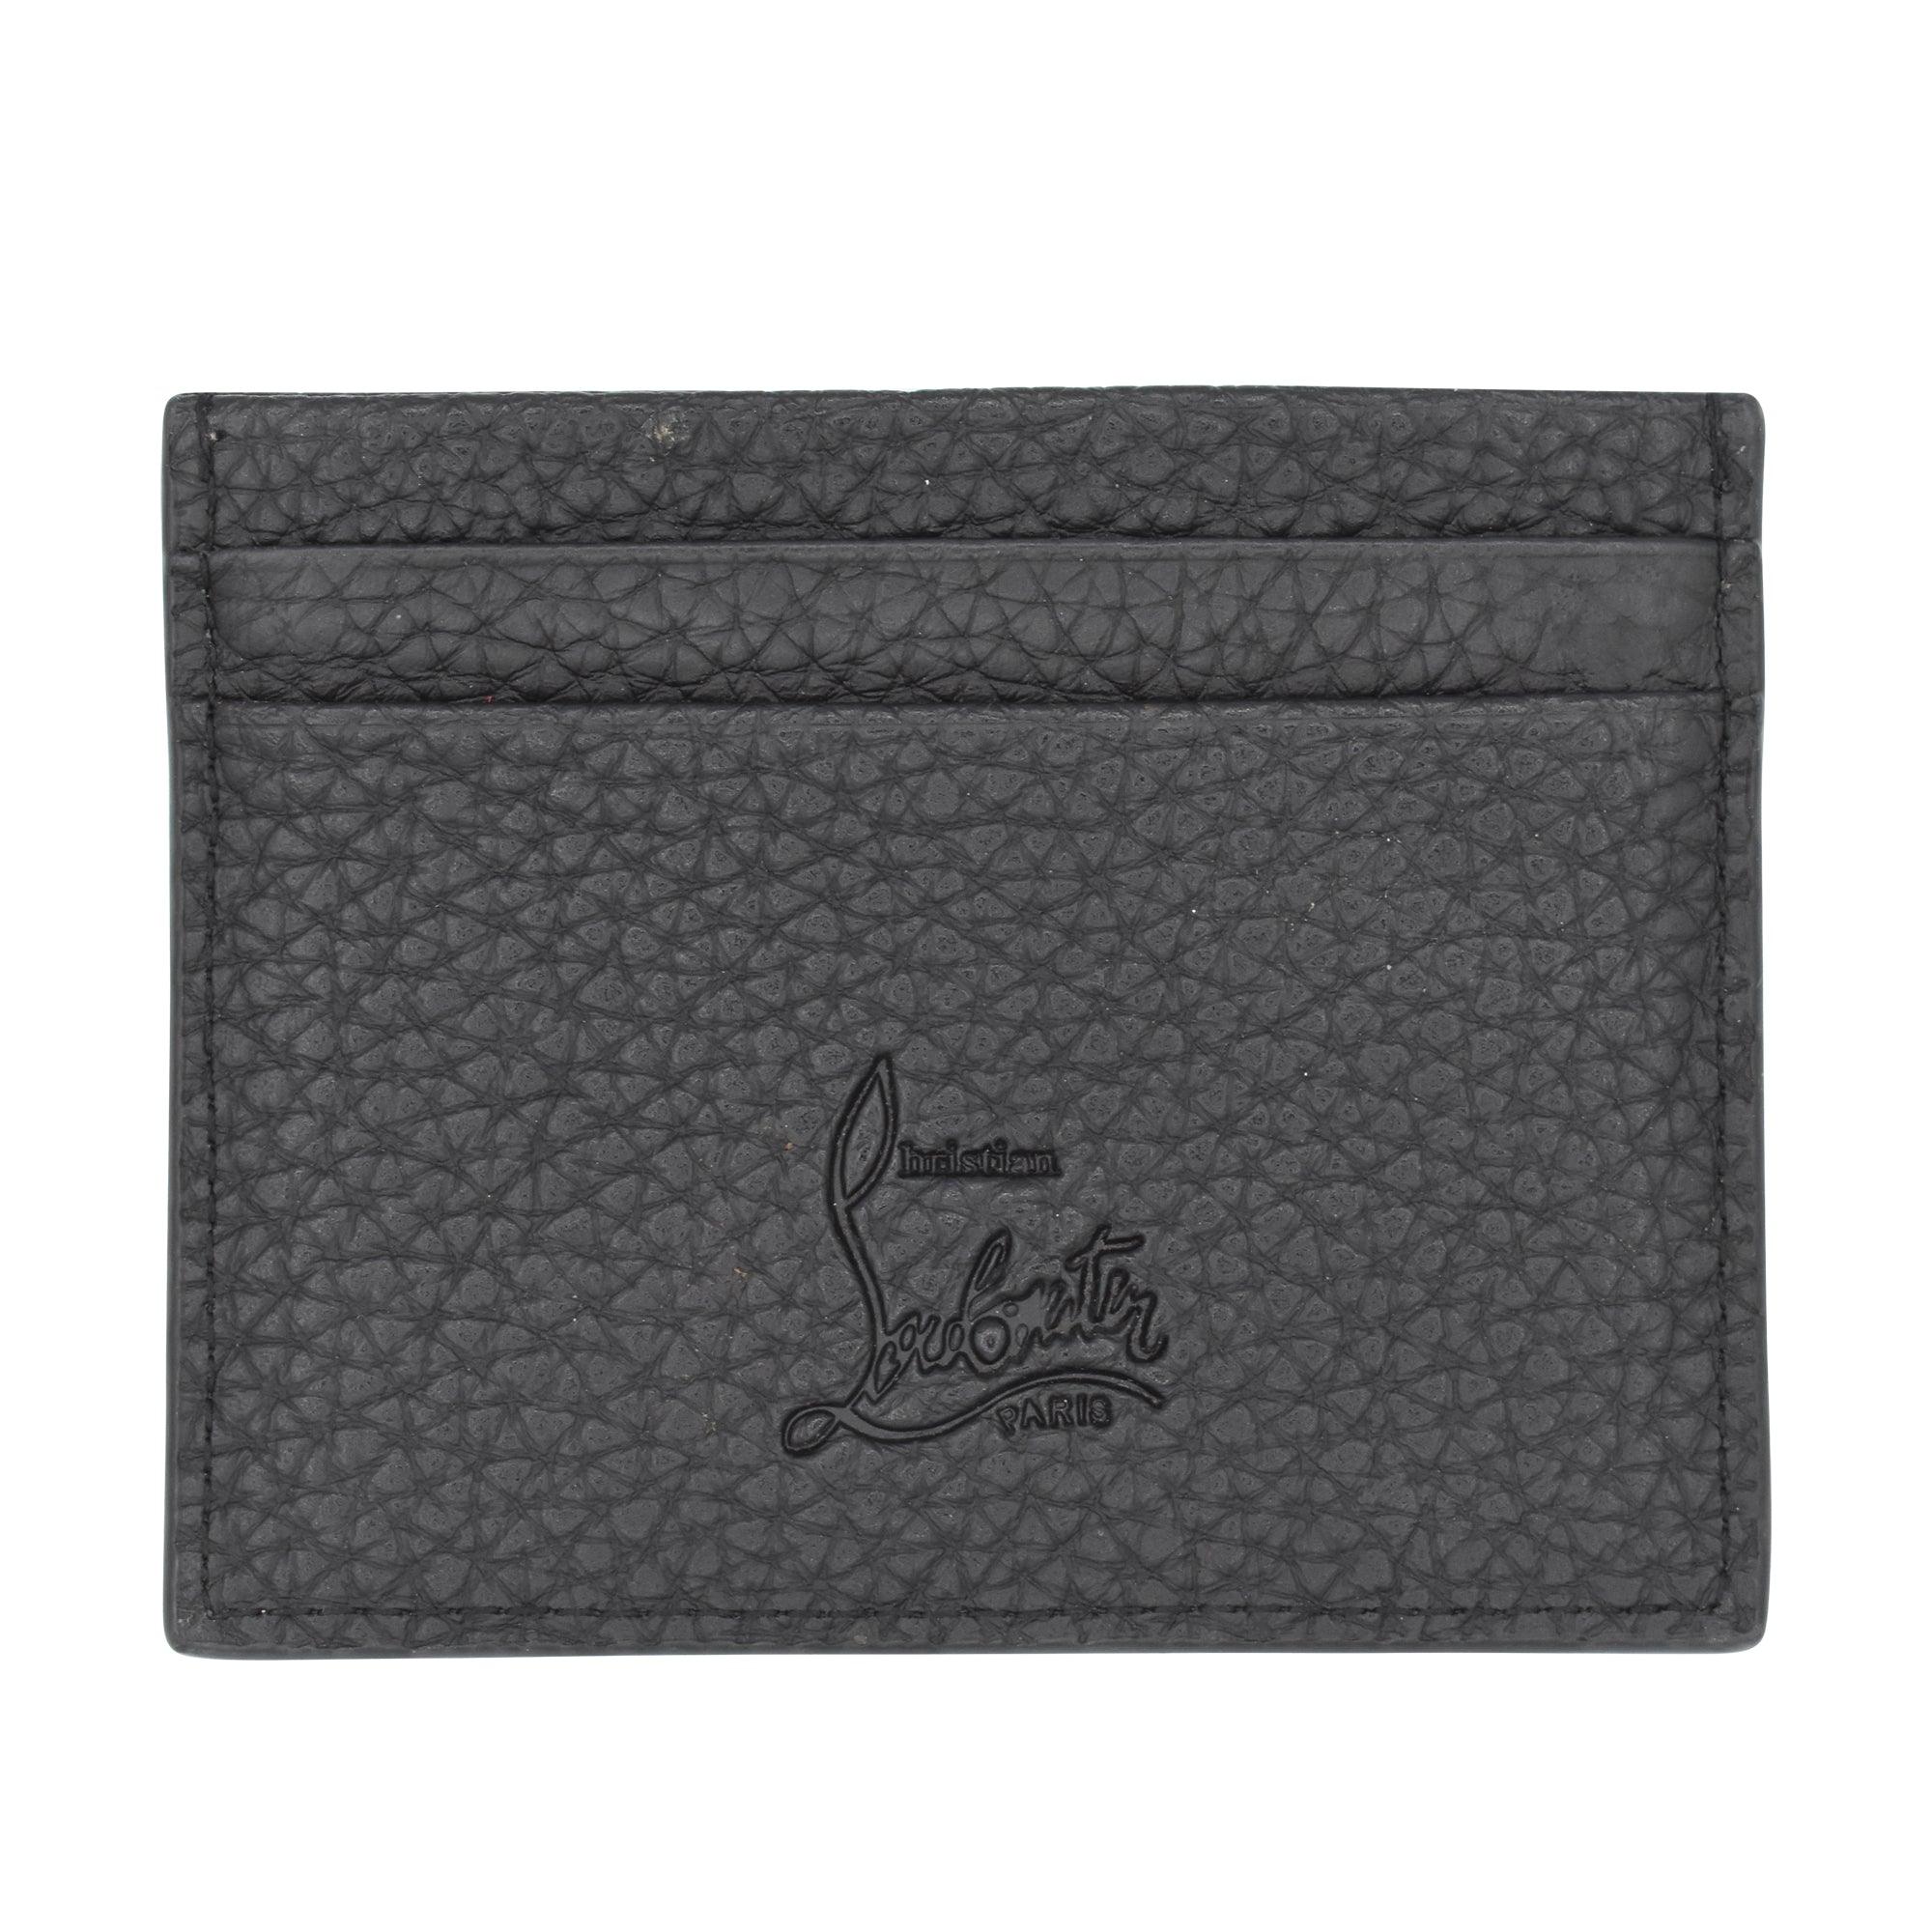 Christian Louboutin Card Holder - Fashionably Yours